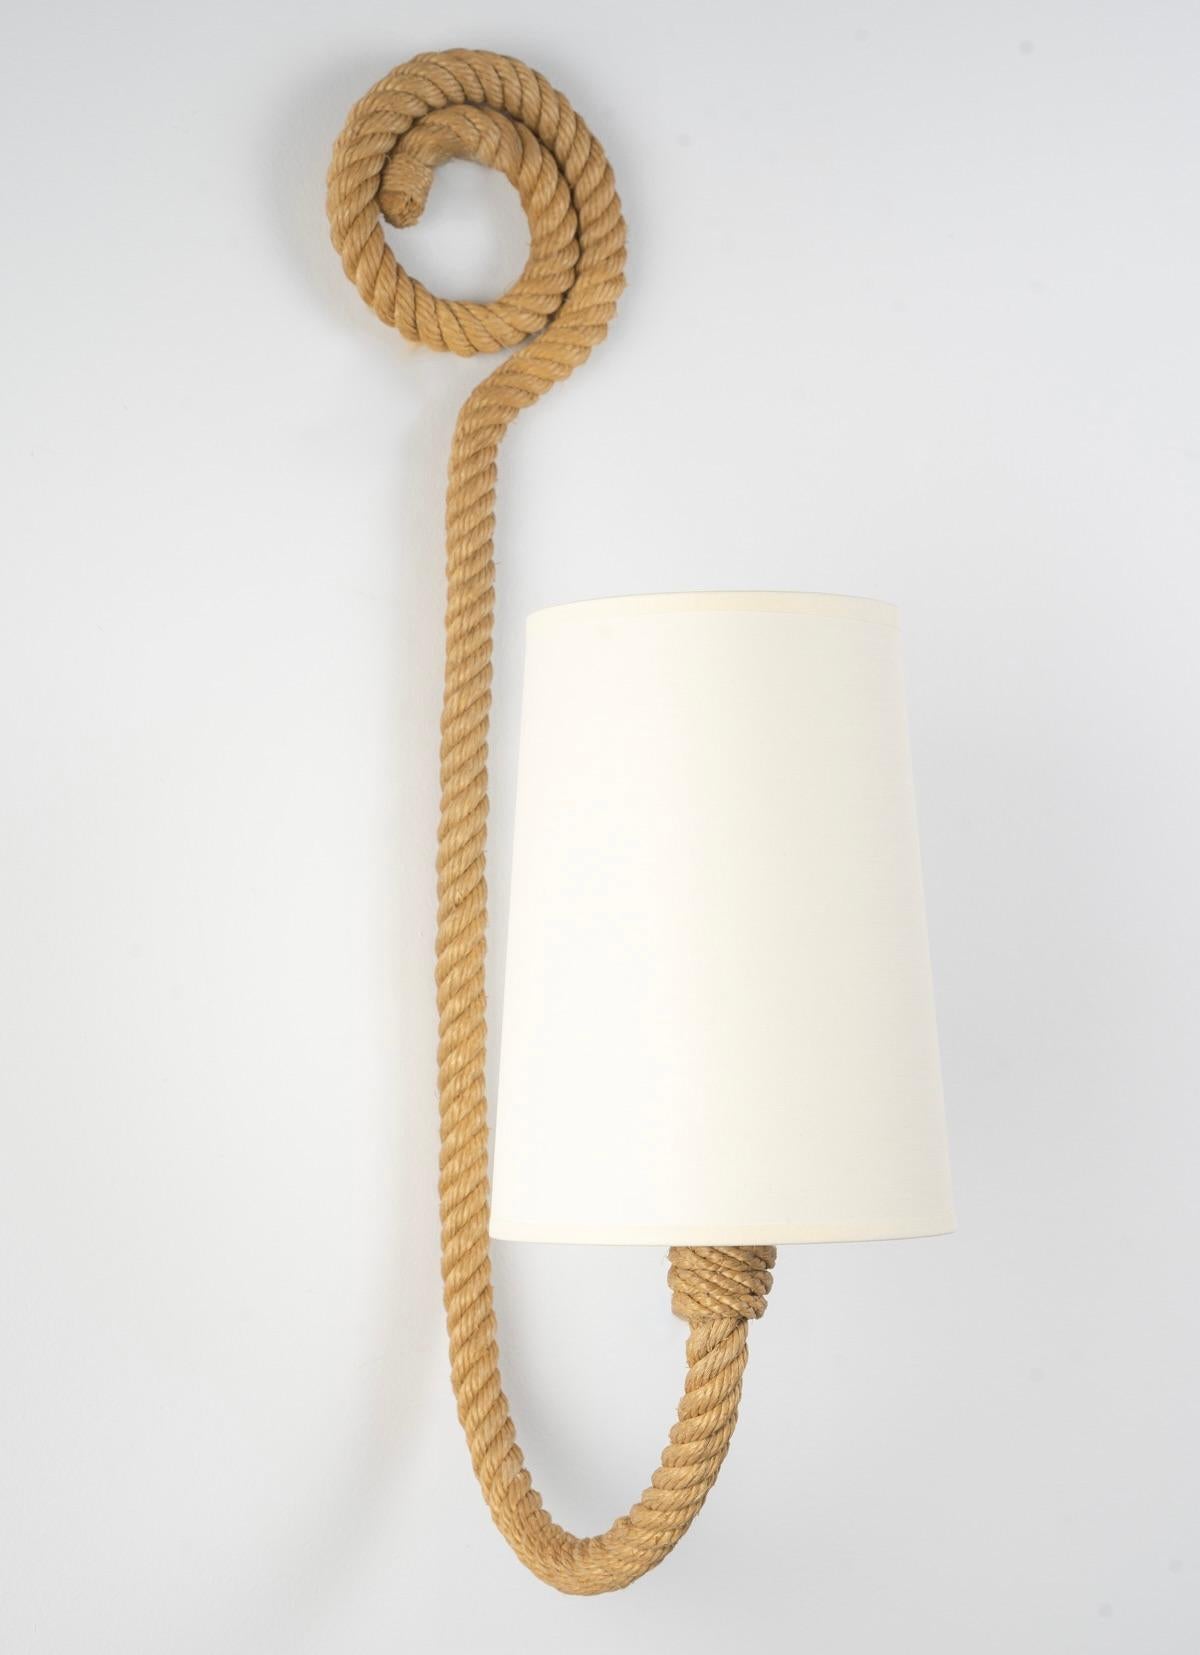 Composed of a rope arm that curves forward on the lower part and is covered by a conical shade in off-white cotton reworked to match.
On the upper part, the rope arm ends in a spiral that beautifully decorates the sconce.
1 light arm.

Adrien Audoux